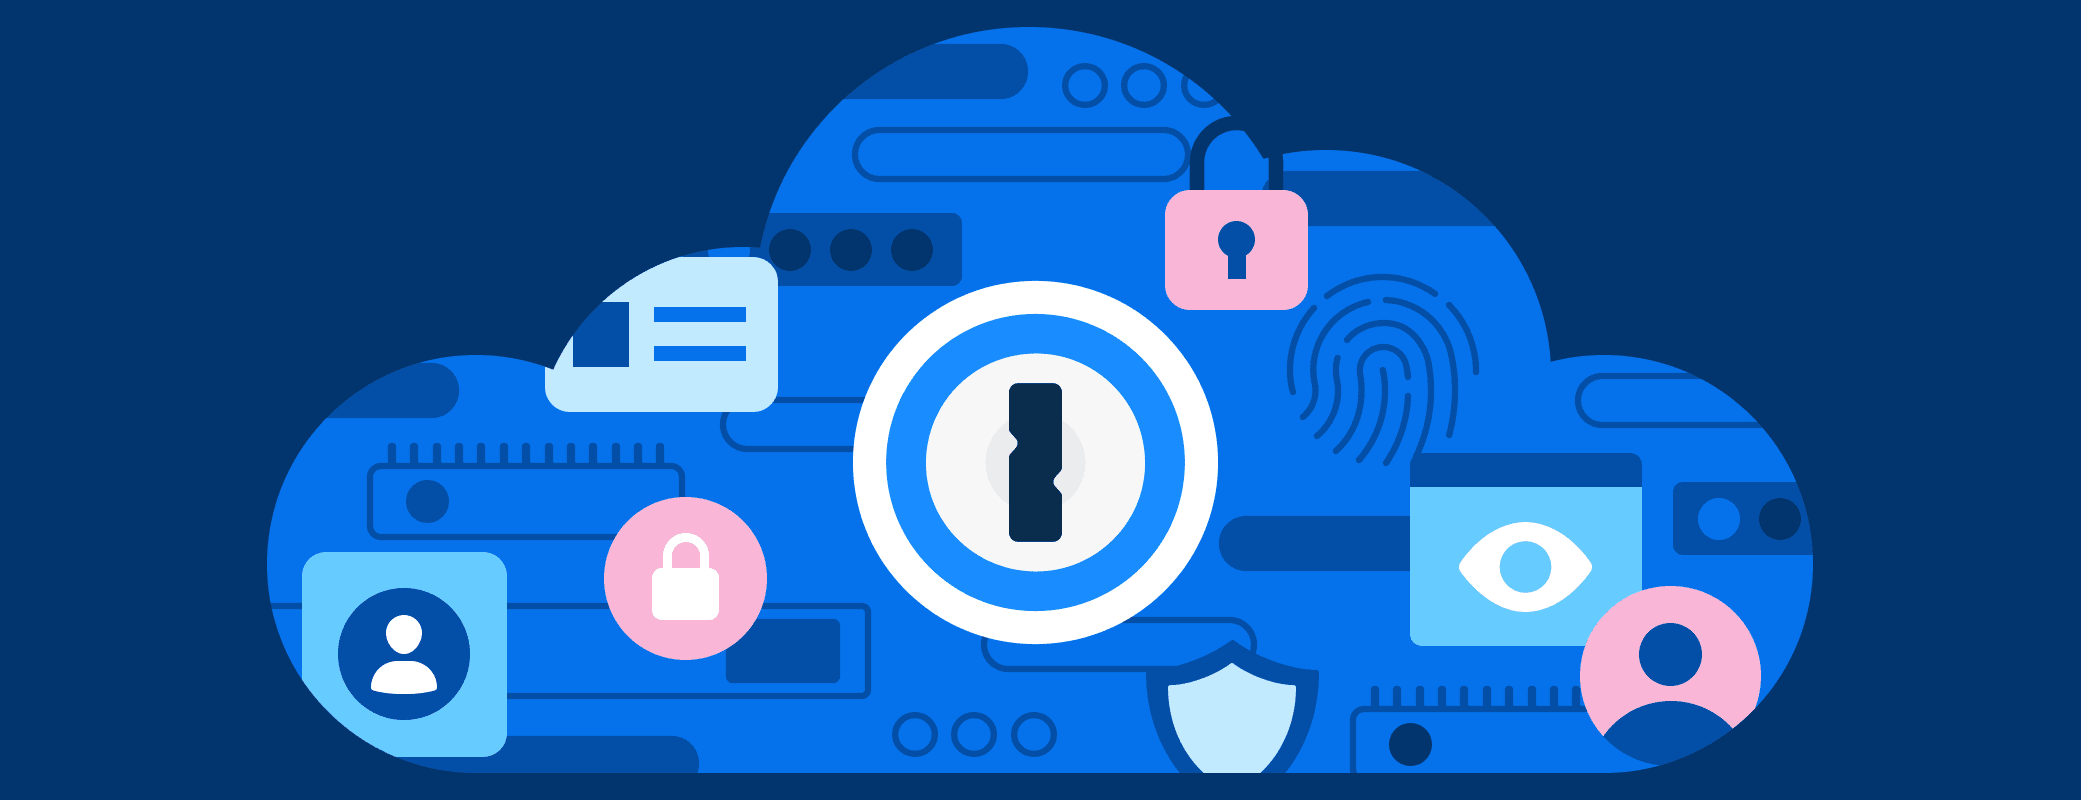 Why You can Trust 1Password's Cloud Storage and Syncing | 1Password